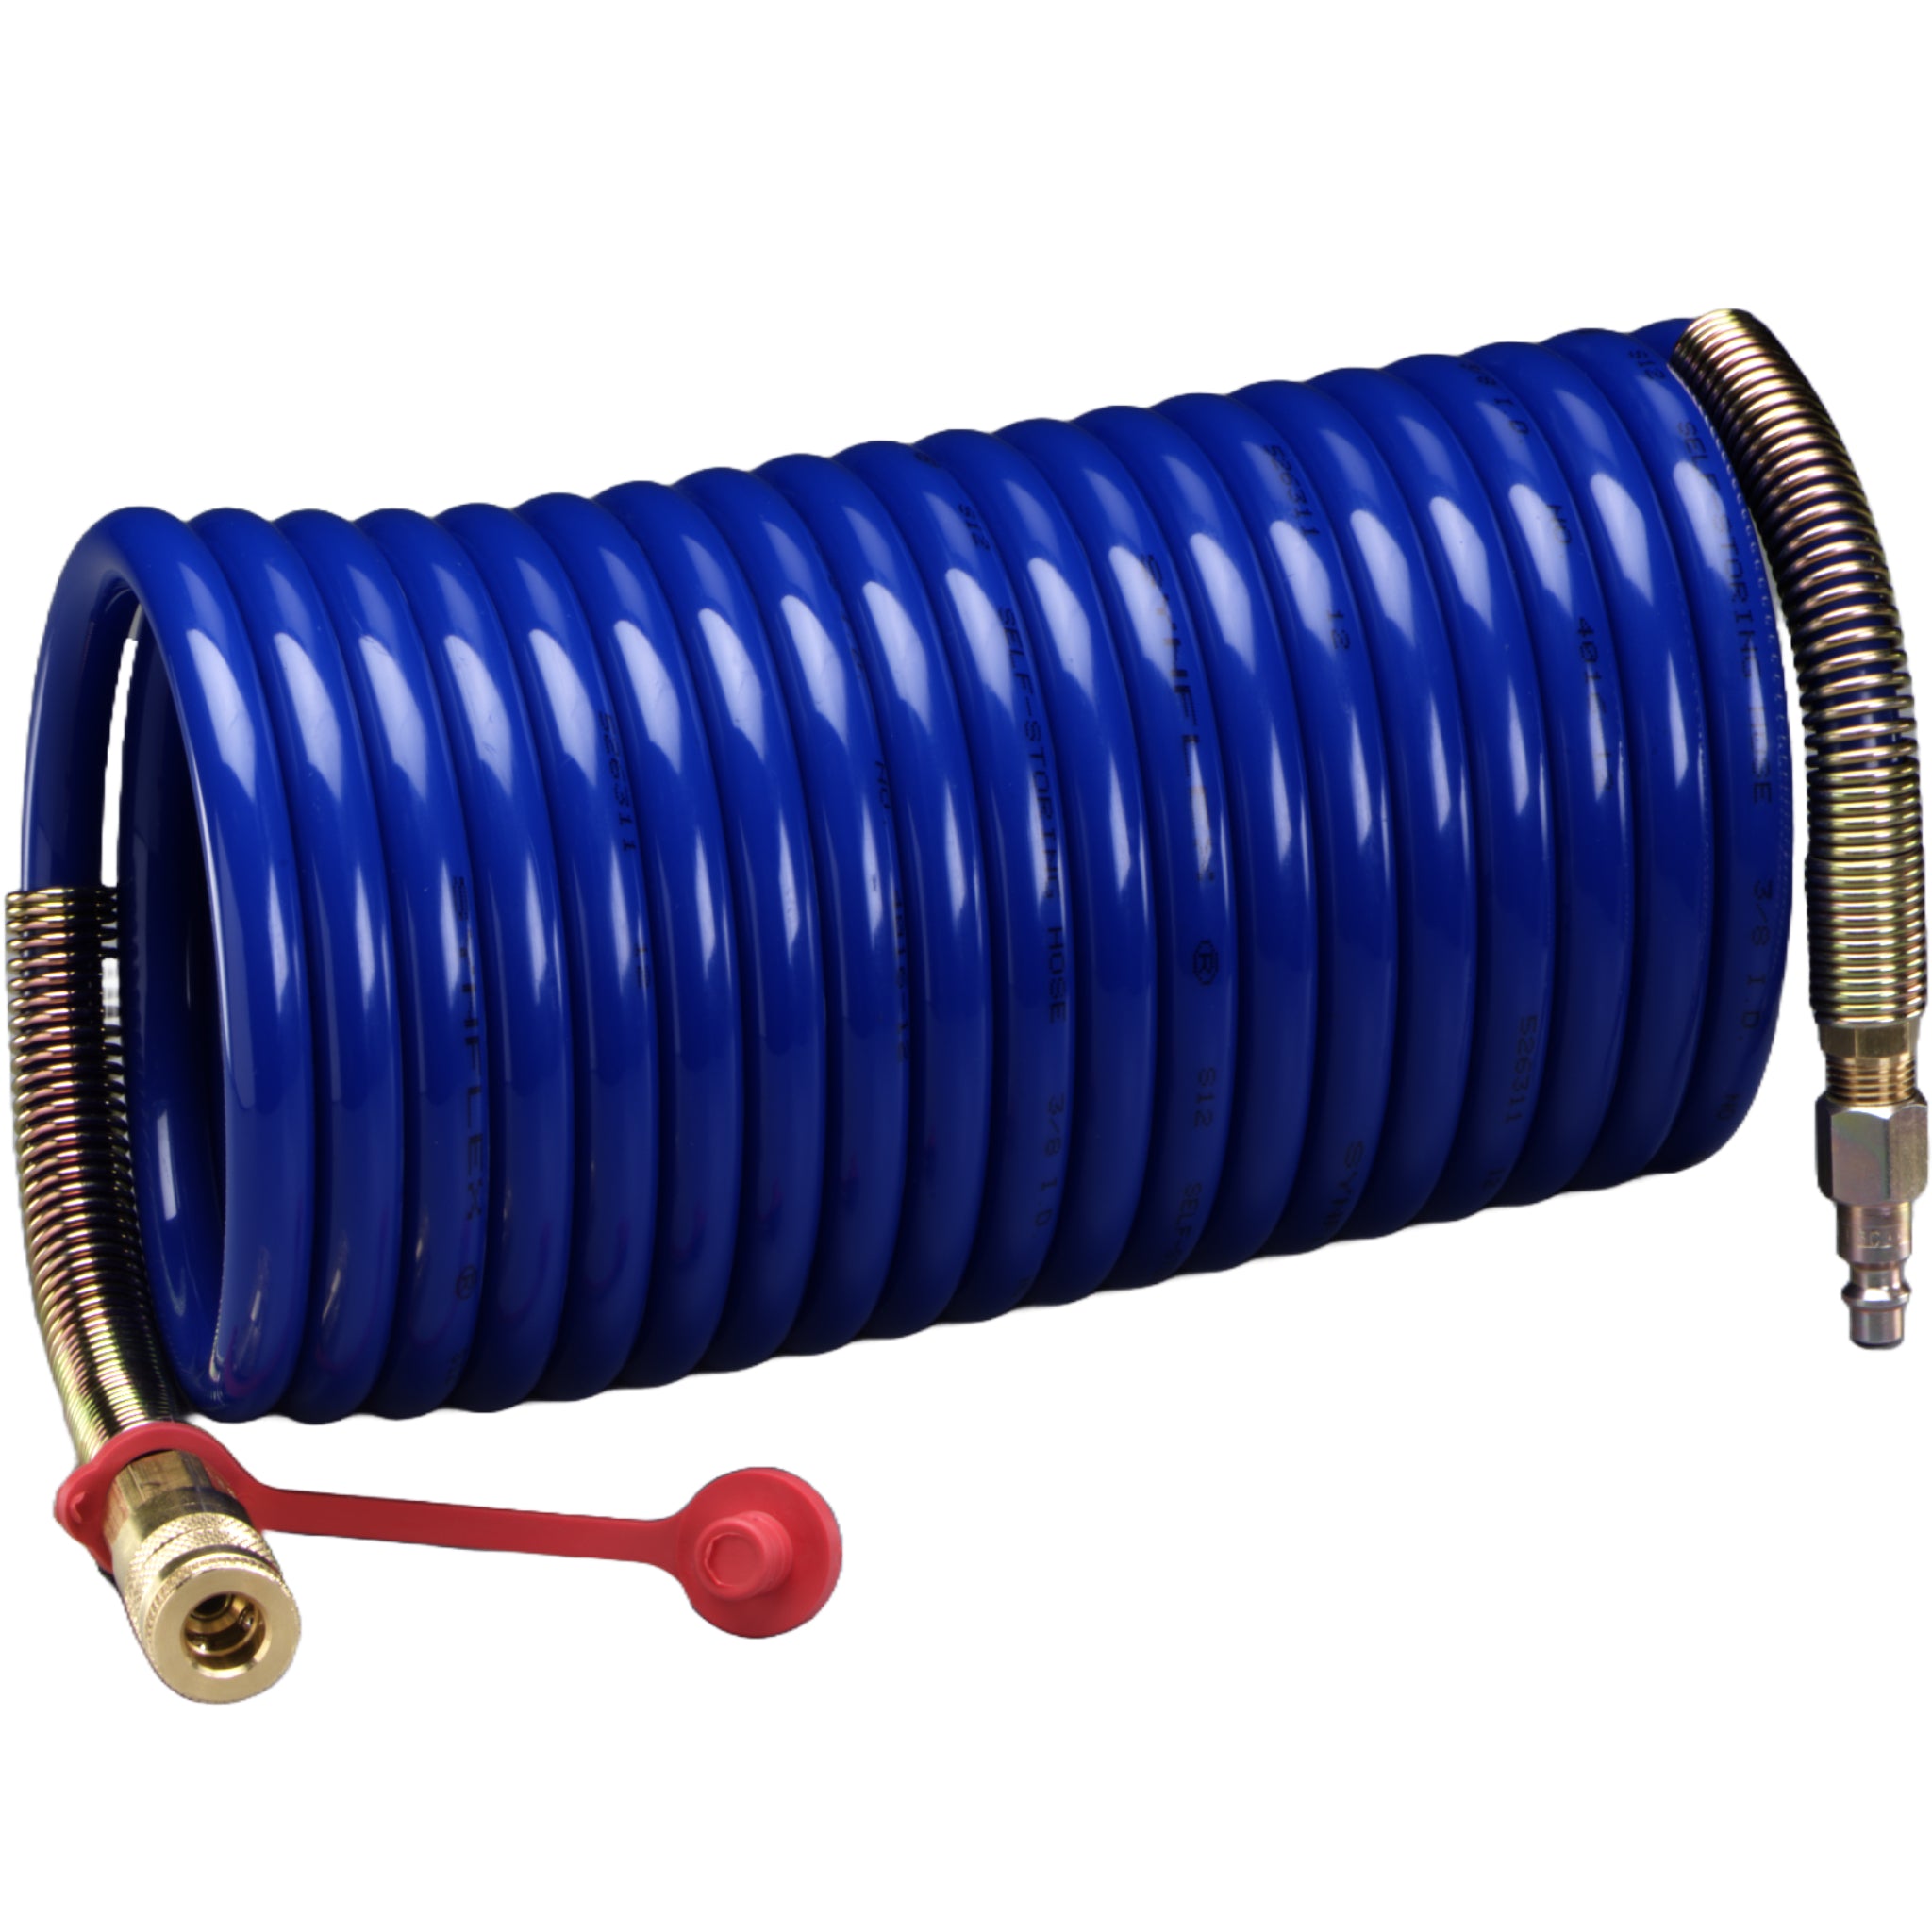 3M Supplied Air Hose W-2929SR-50, 50 ft, 3/8 in ID, Schrader Fittings,

High Pressure, Coiled 1 EA/Case